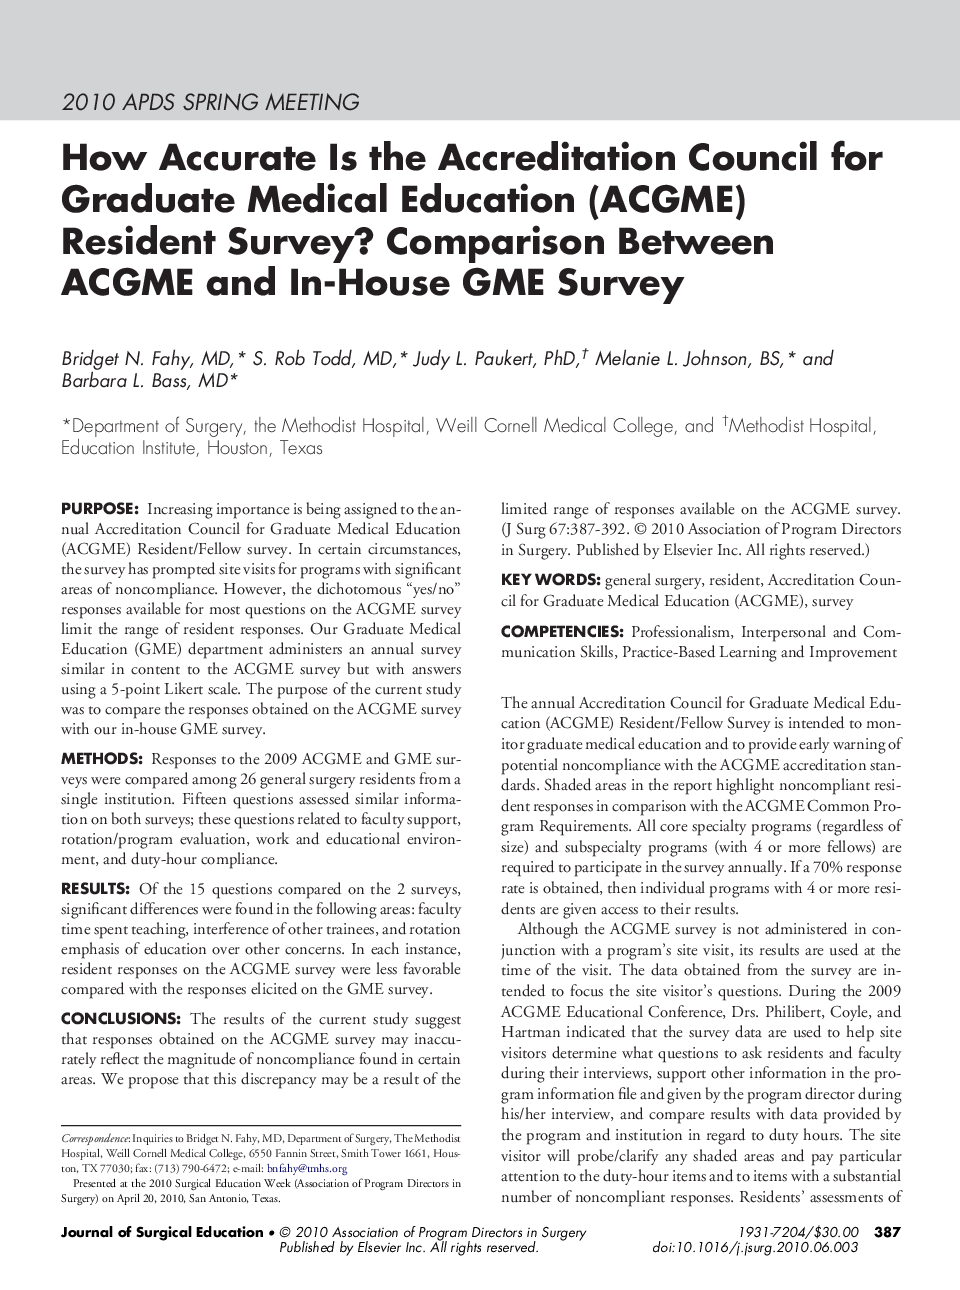 How Accurate Is the Accreditation Council for Graduate Medical Education (ACGME) Resident Survey? Comparison Between ACGME and In-House GME Survey